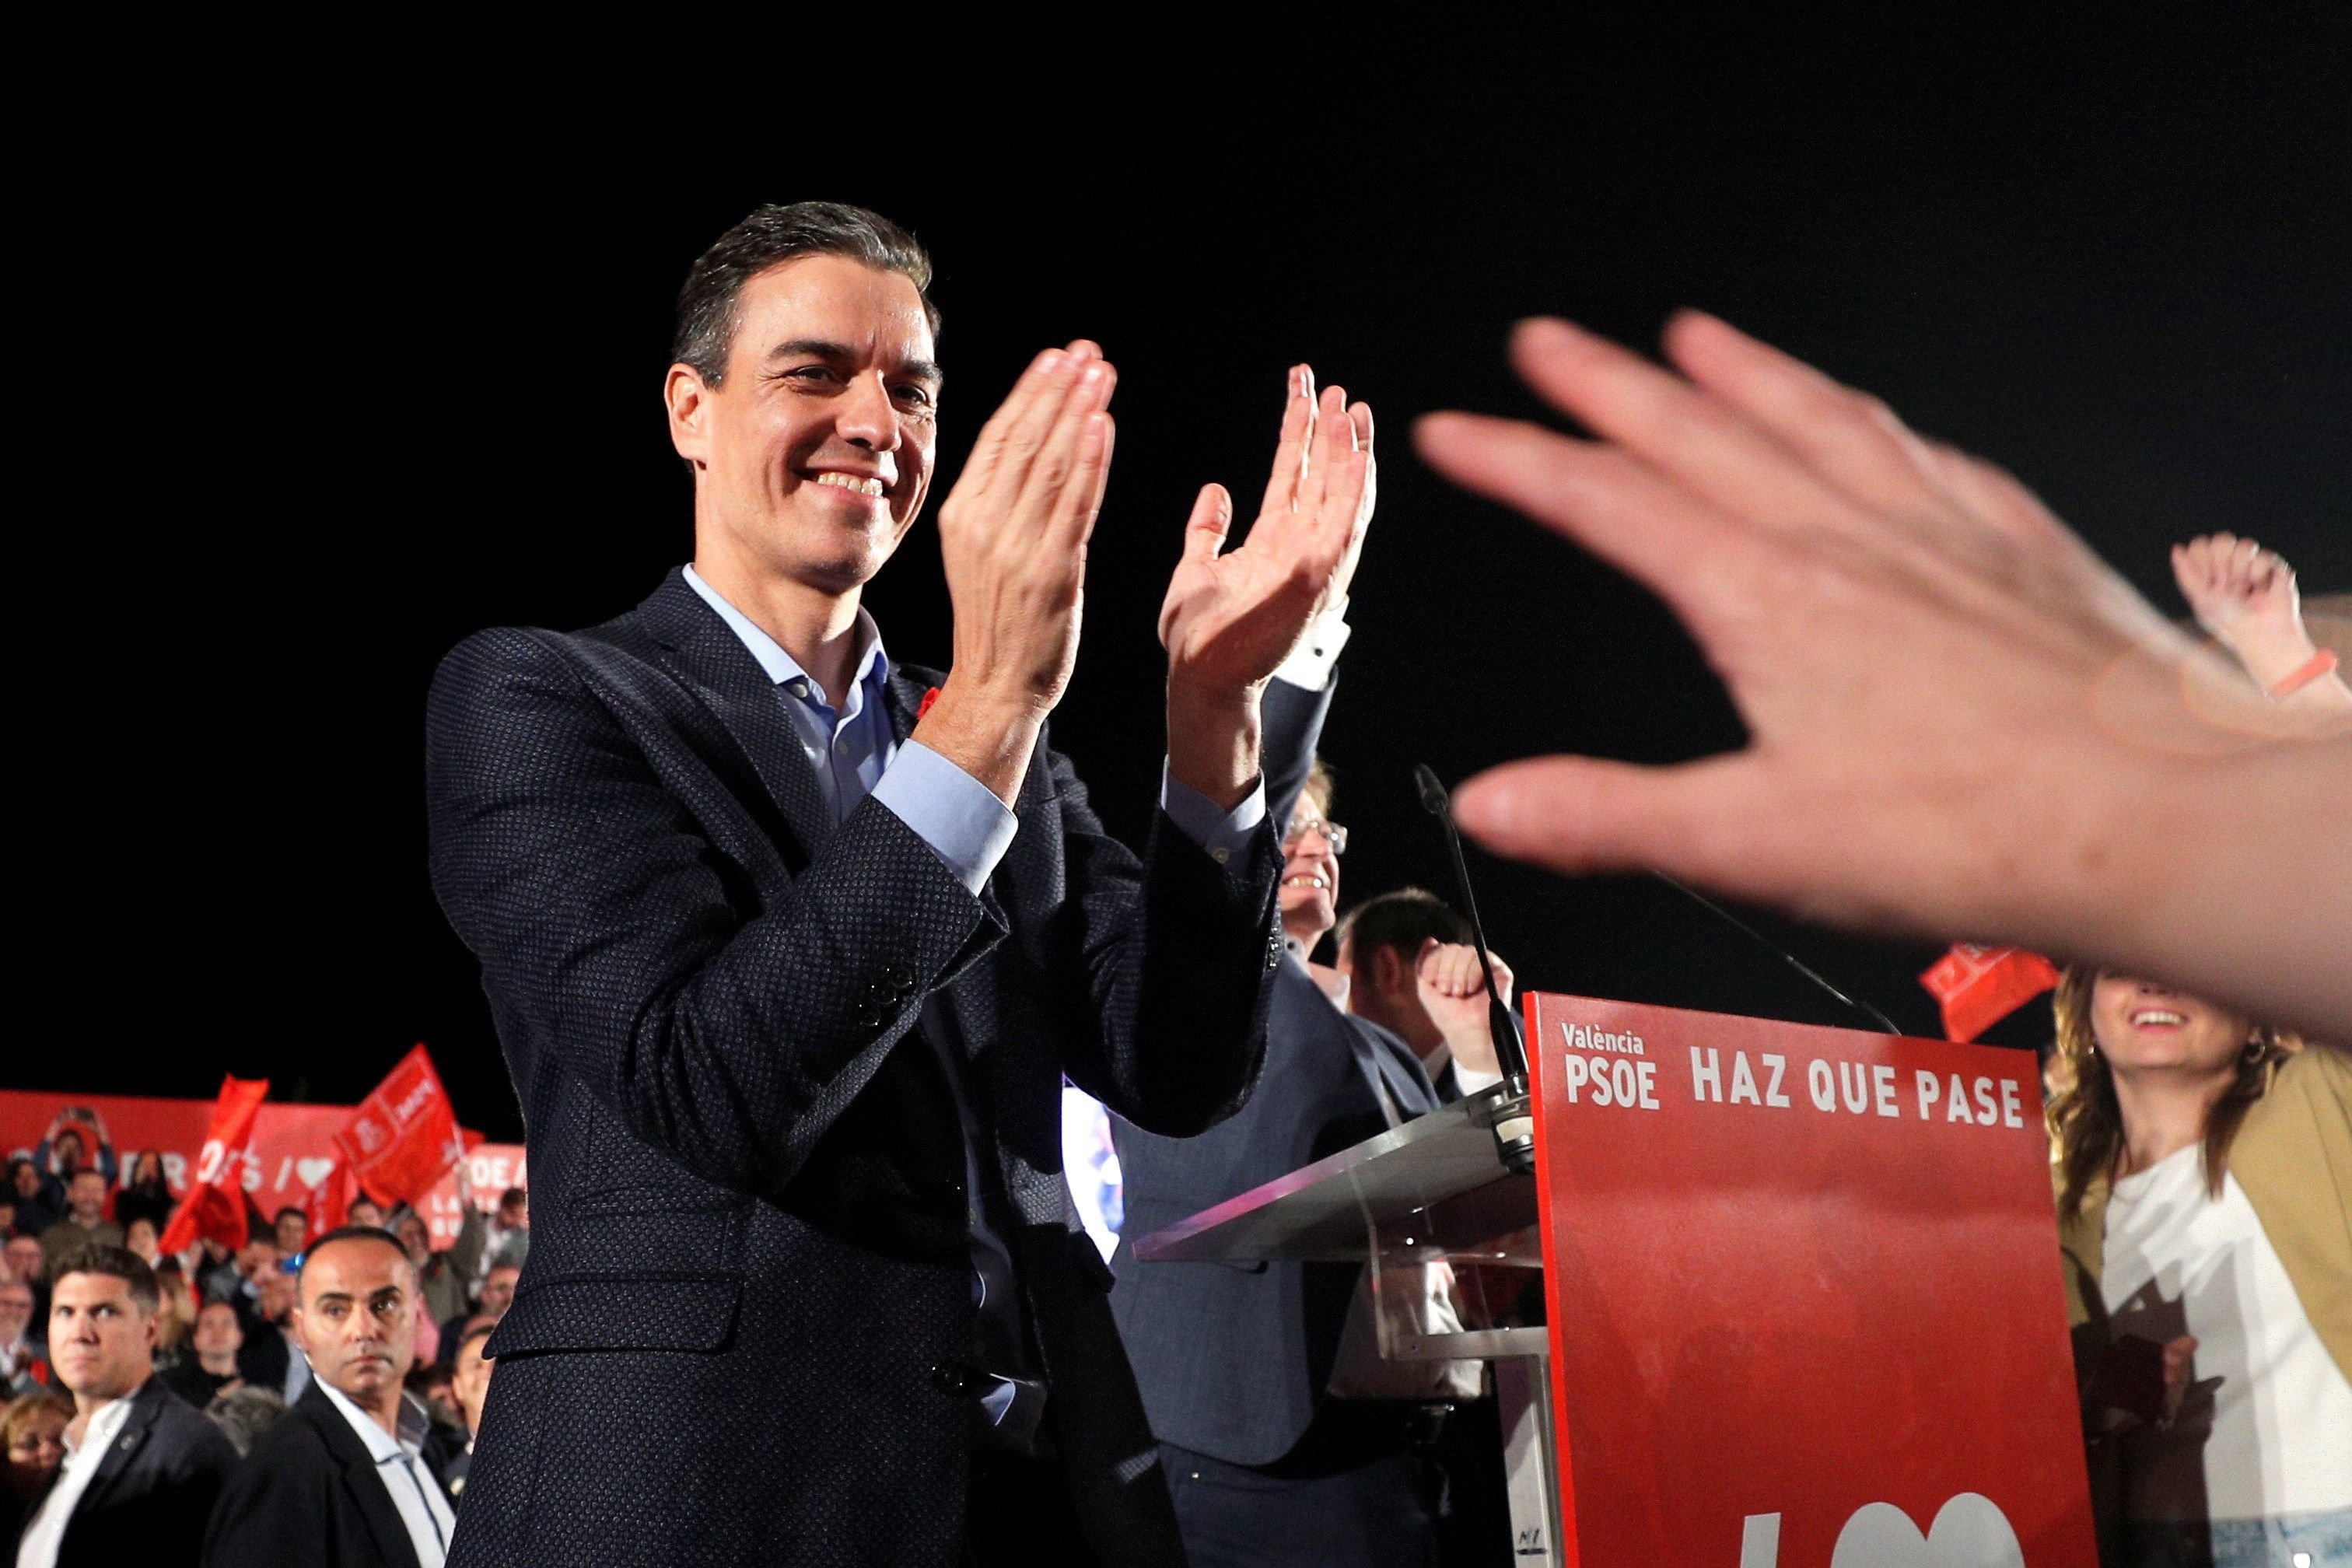 Polls: Socialists to win in Spain, needing Podemos and Catalan parties to govern